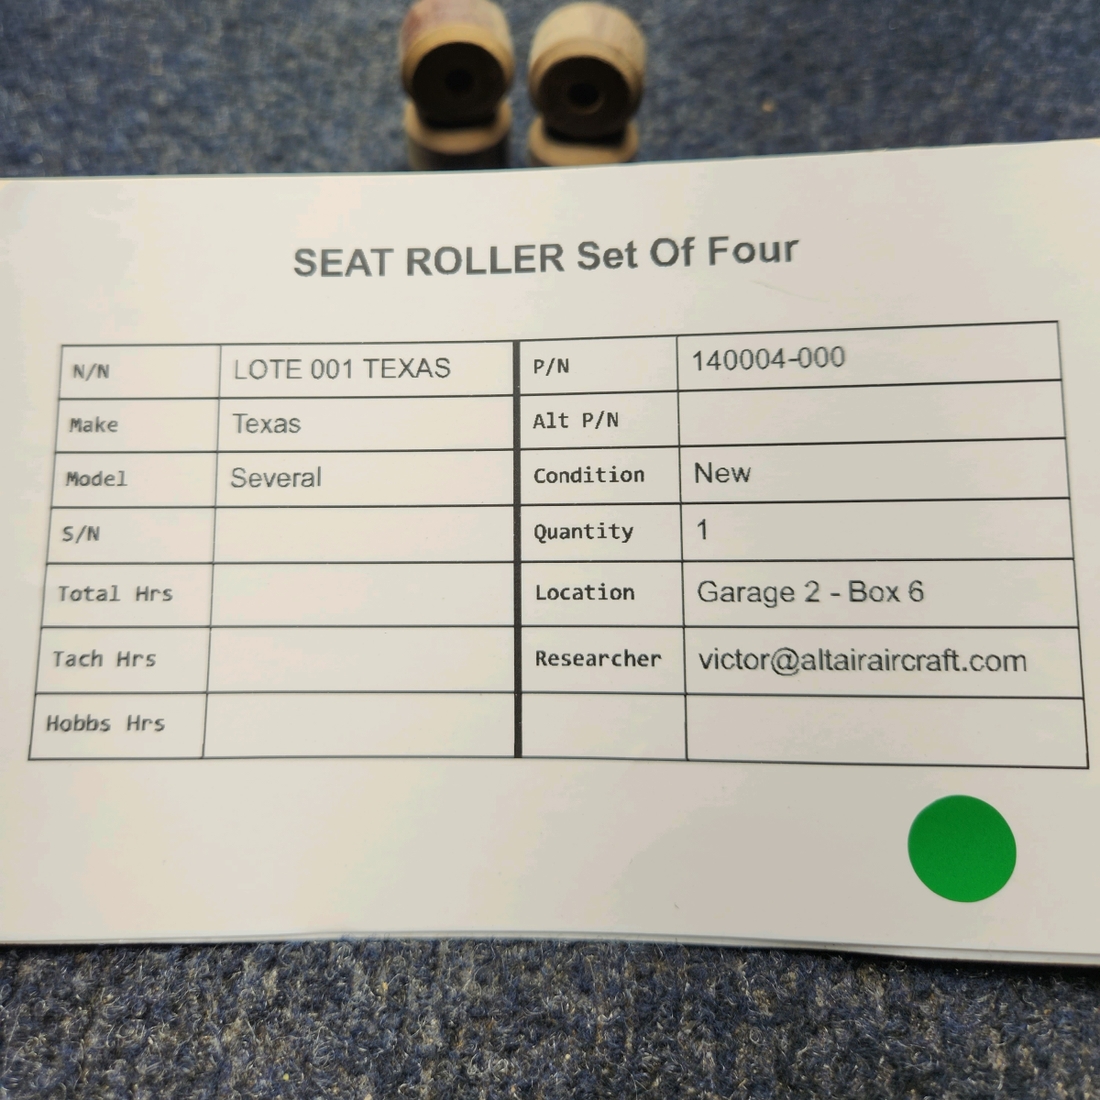 Used aircraft parts for sale, 140004-000 Mooney Texas Several SEAT ROLLER SET OF FOUR